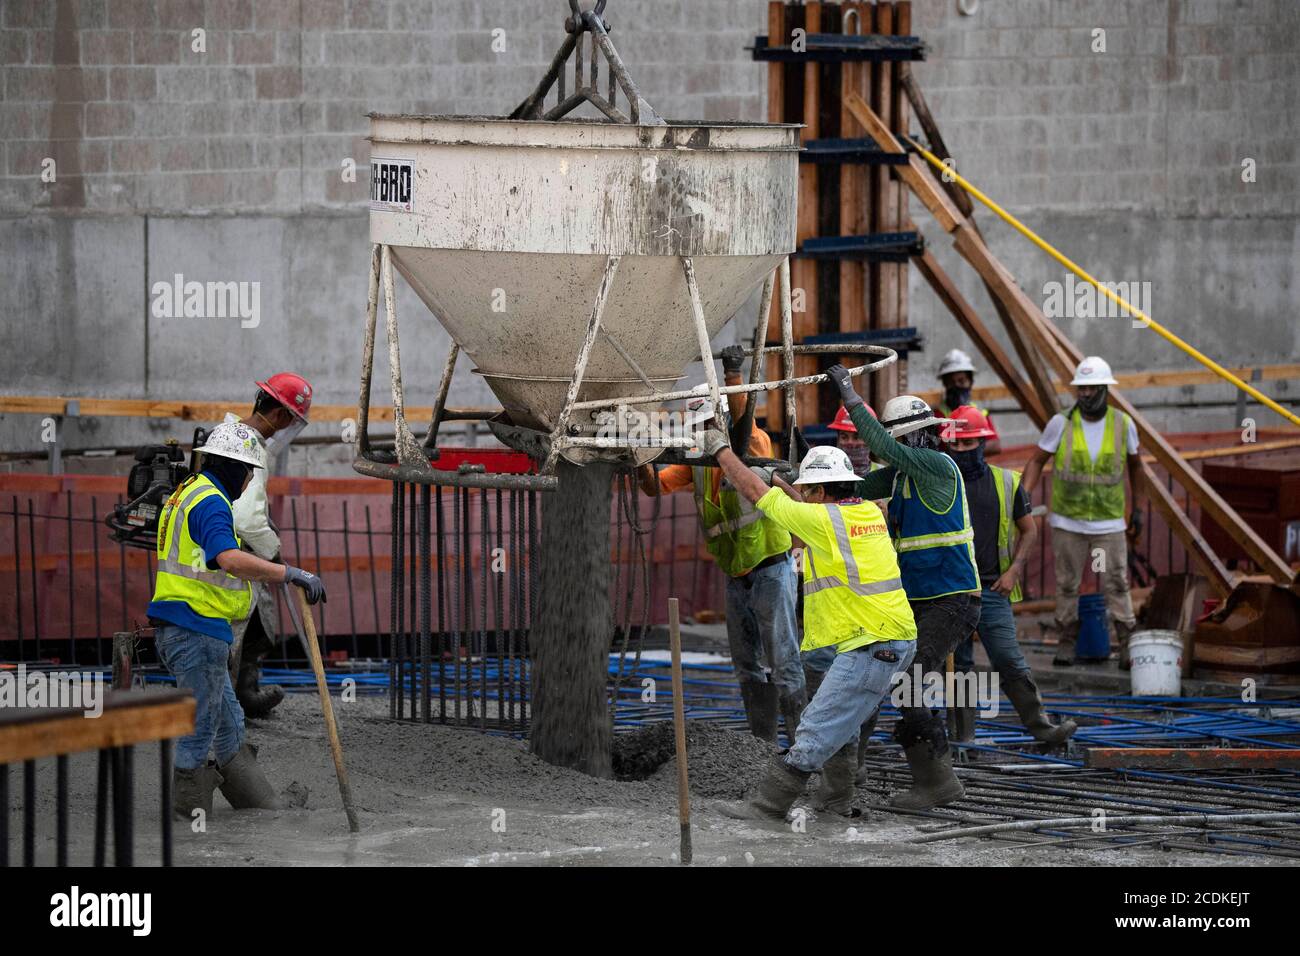 Austin, TX USA August 22, 2020: Experienced concrete crew conducts a night pour on the top floor of a high-rise parking garage in downtown Austin. Major construction projects continue unabated during the coronavirus shutdowns in Texas. Stock Photo